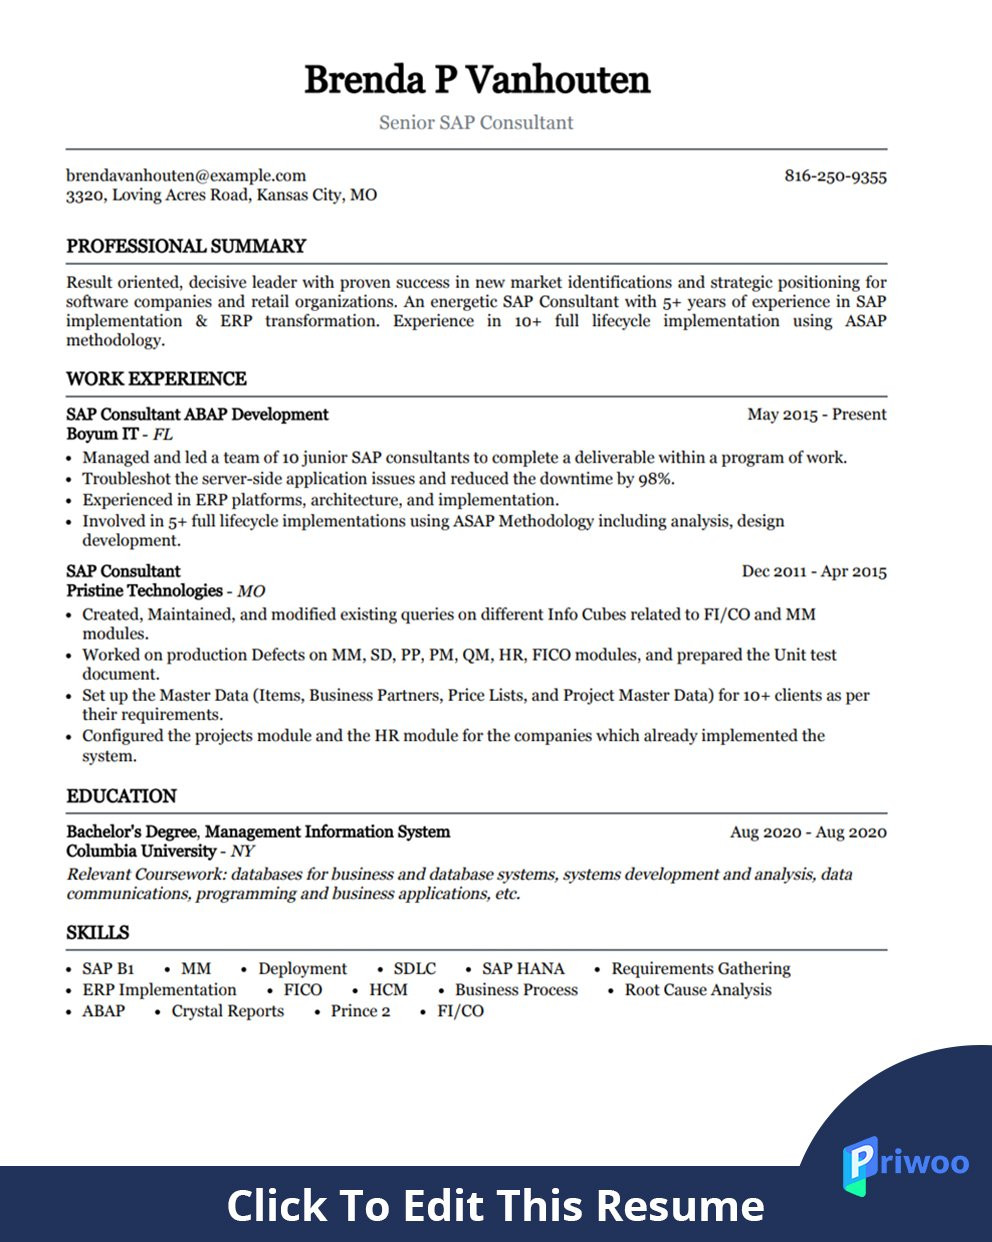 Sample Resume for Sap Mm Consultant Sap Consultant Resume Example (best Action Verbs & Skills) Priwoo